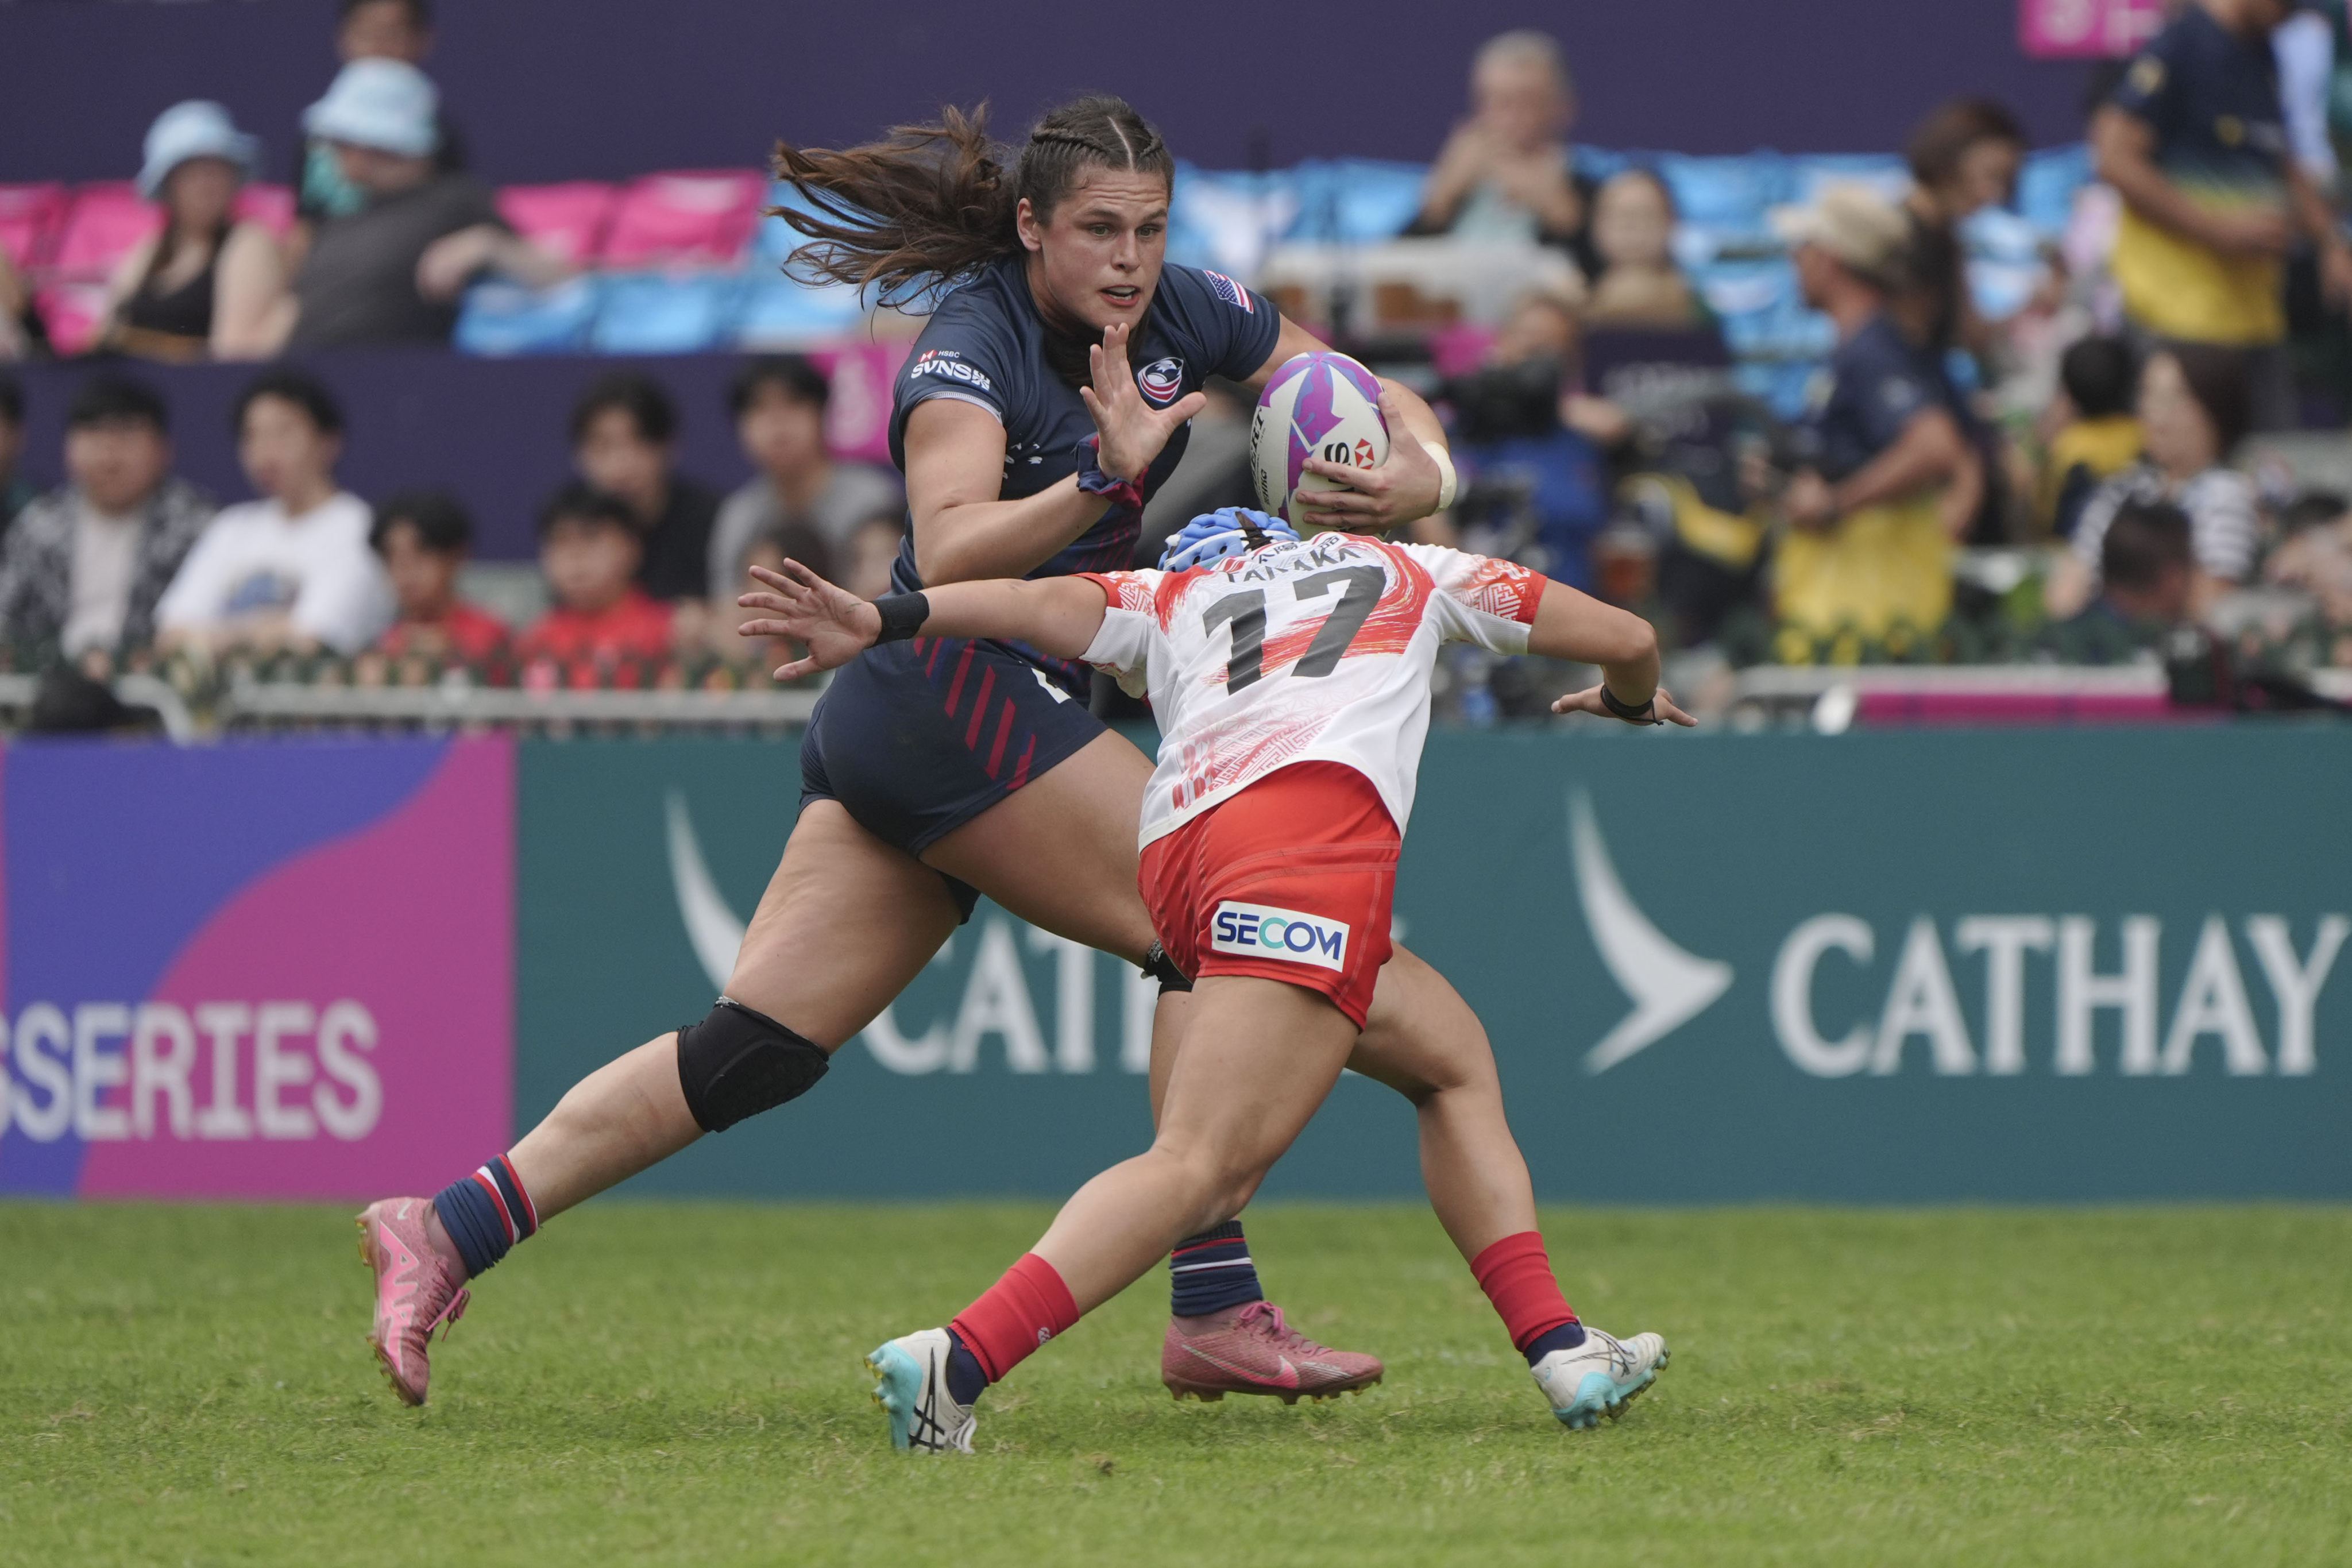 The USA’s Ilona Maher fends off Japan’s Emii Tanaka during the Americans’ 17-12 win on day one of the Sevens on Friday. Photo: Eugene Lee